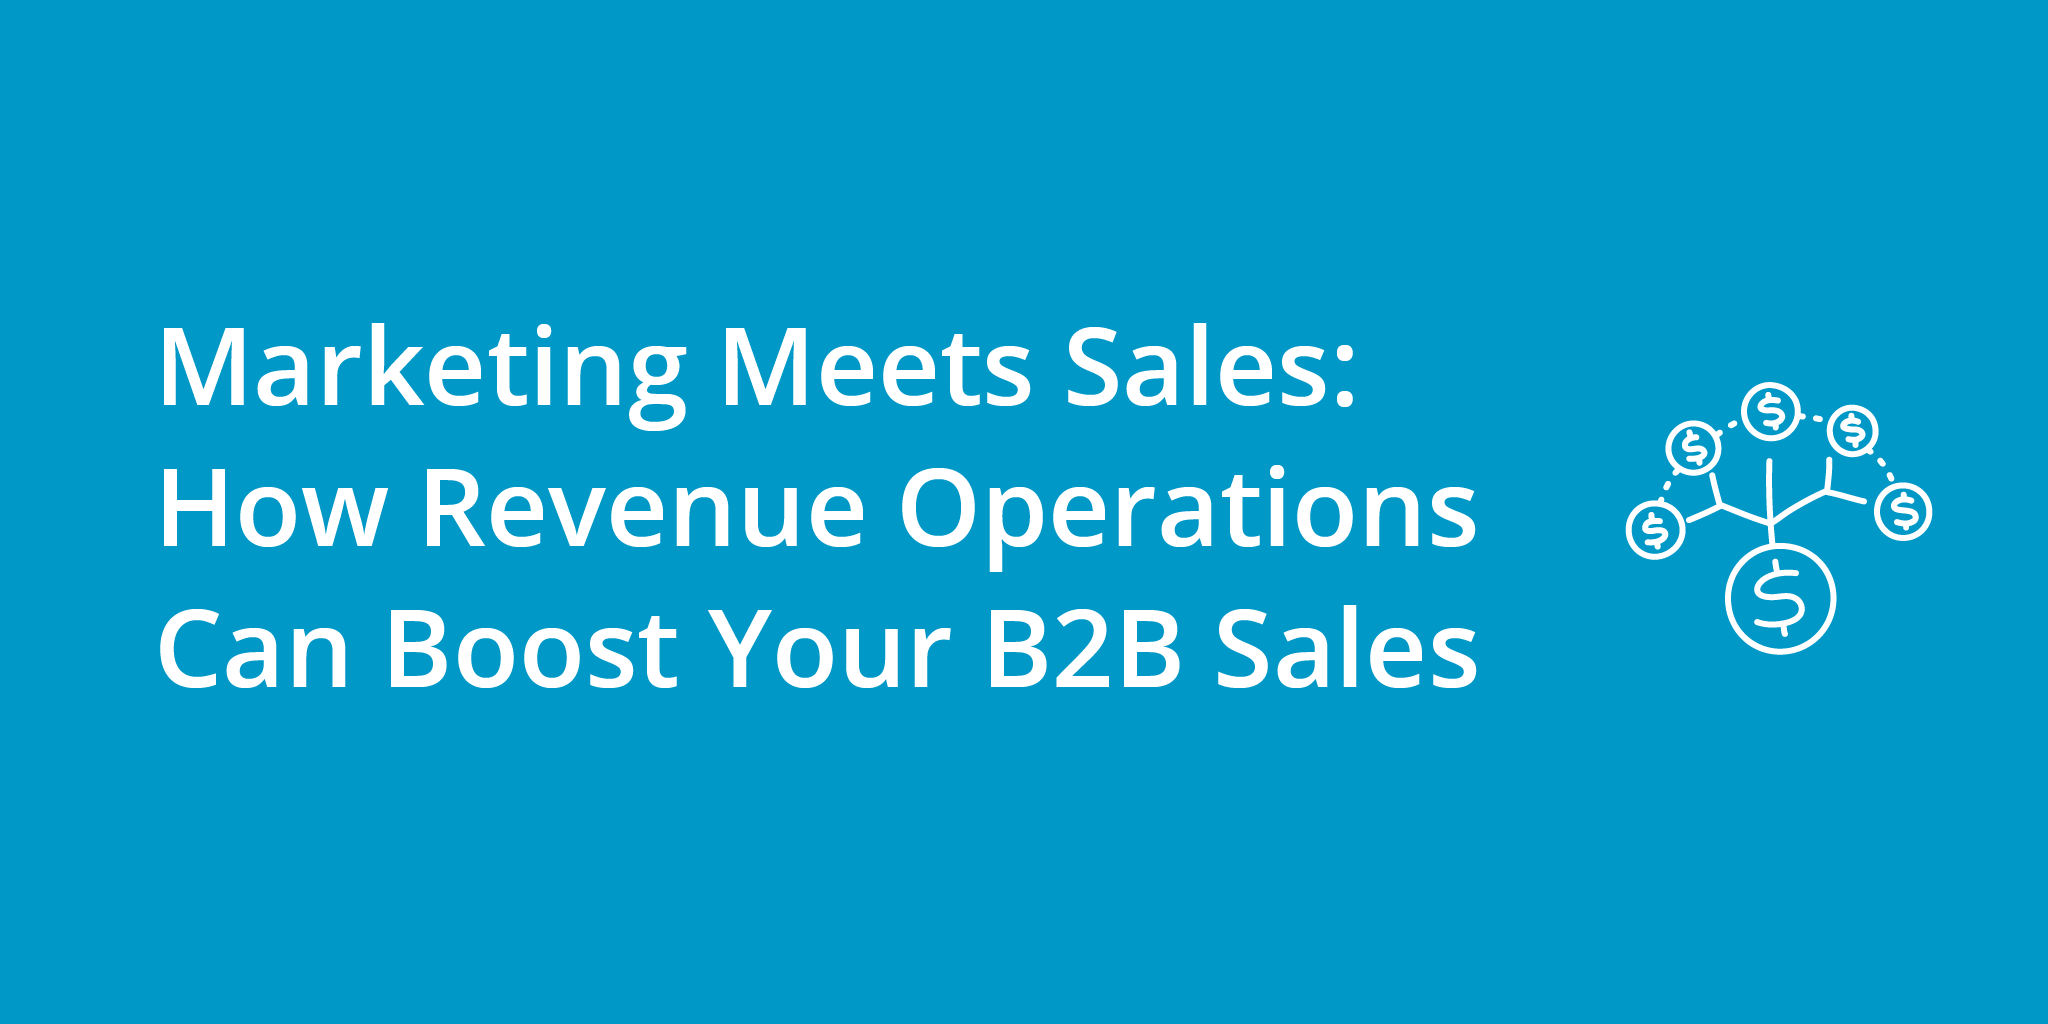 Marketing Meets Sales: How Revenue Operations Can Boost Your B2B Sales